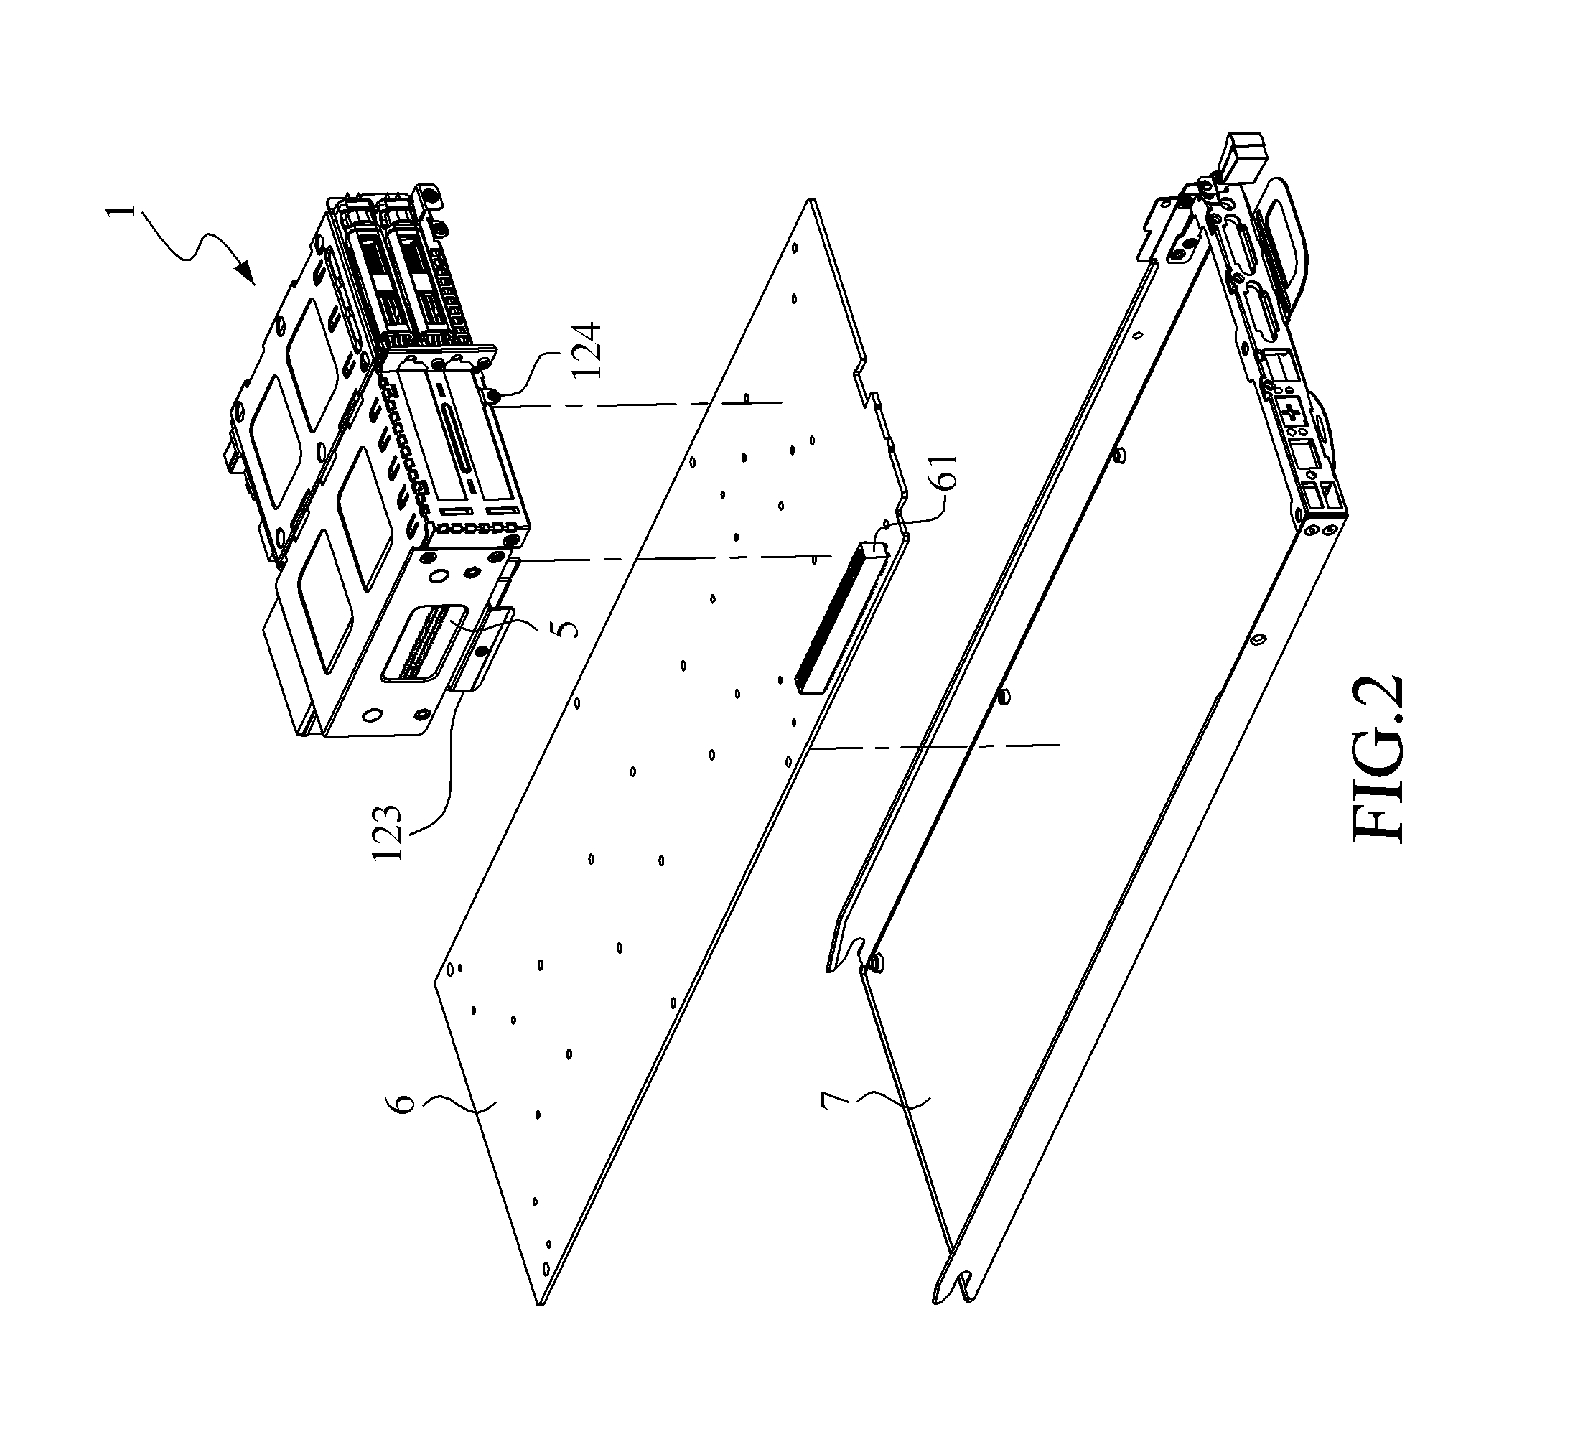 Fixture for electronic device